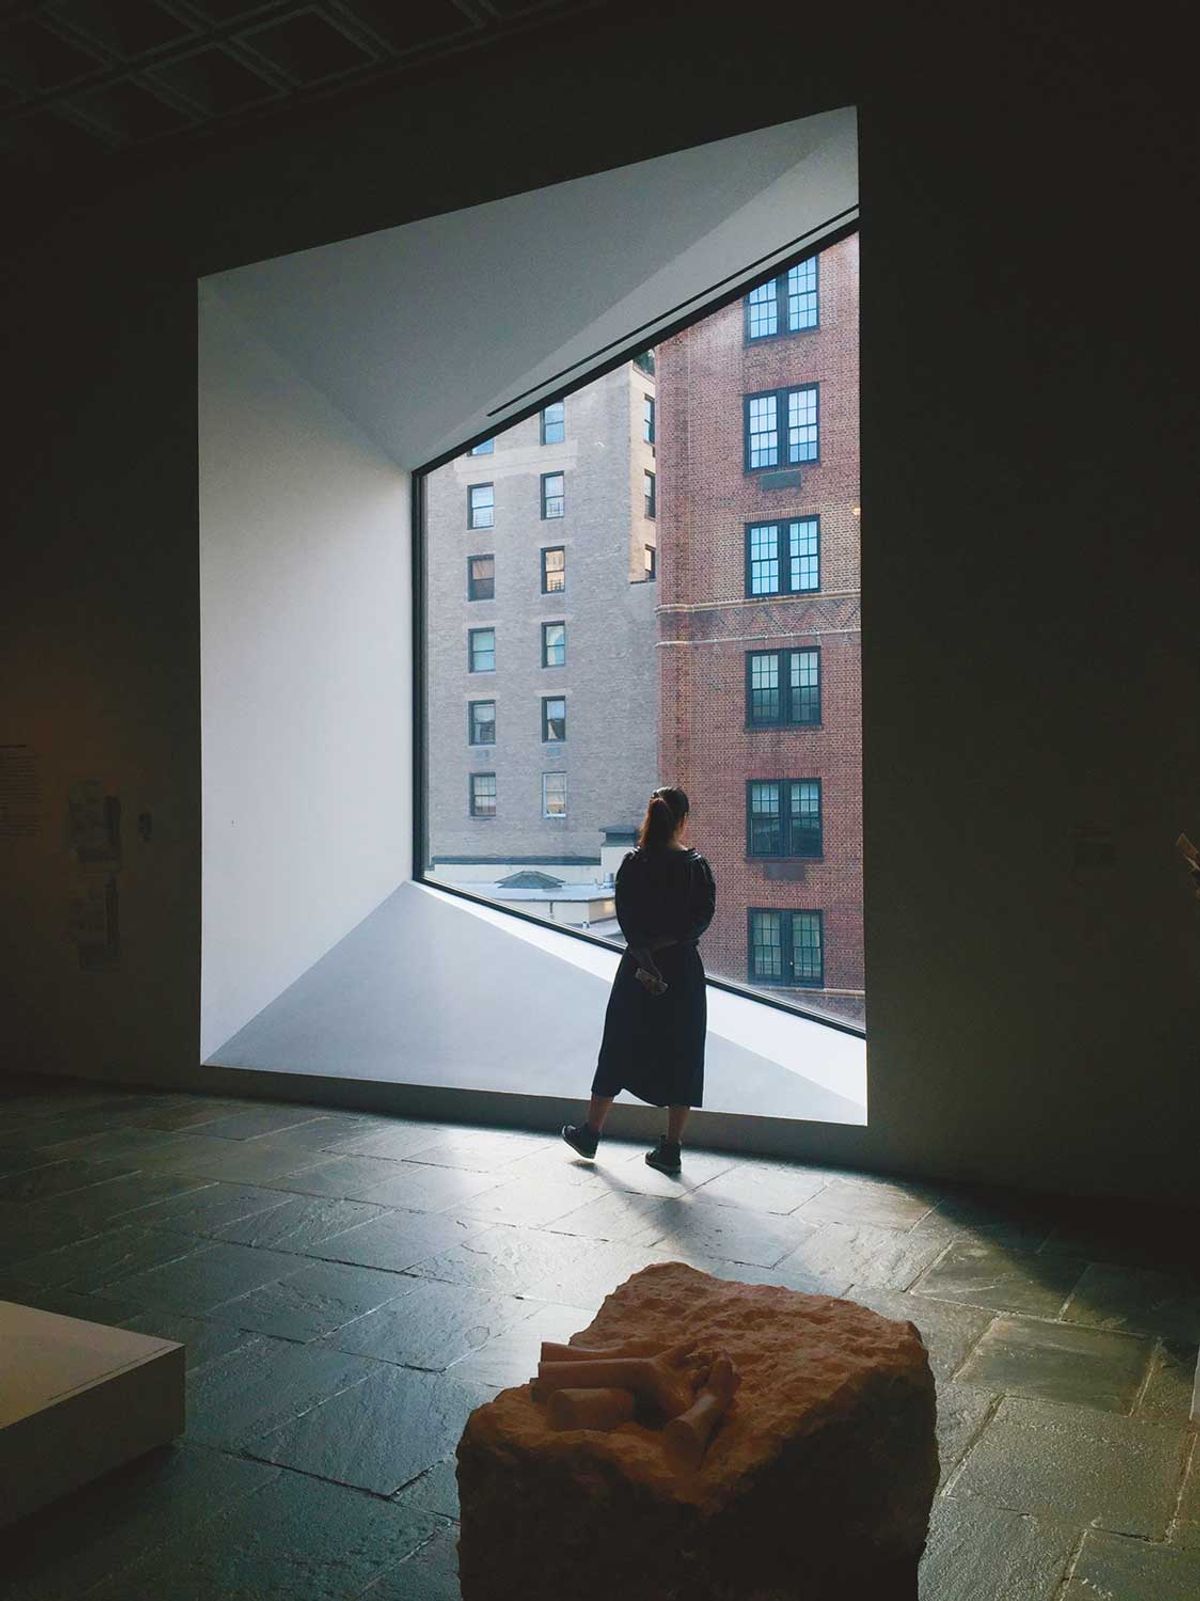 The Breuer Building, which has housed the Whitney Museum of American Art and a branch of the Metropolitan Museum of American Art, will become Sotheby’s flagship building

Photo: Cesar Aloy/Unsplash
